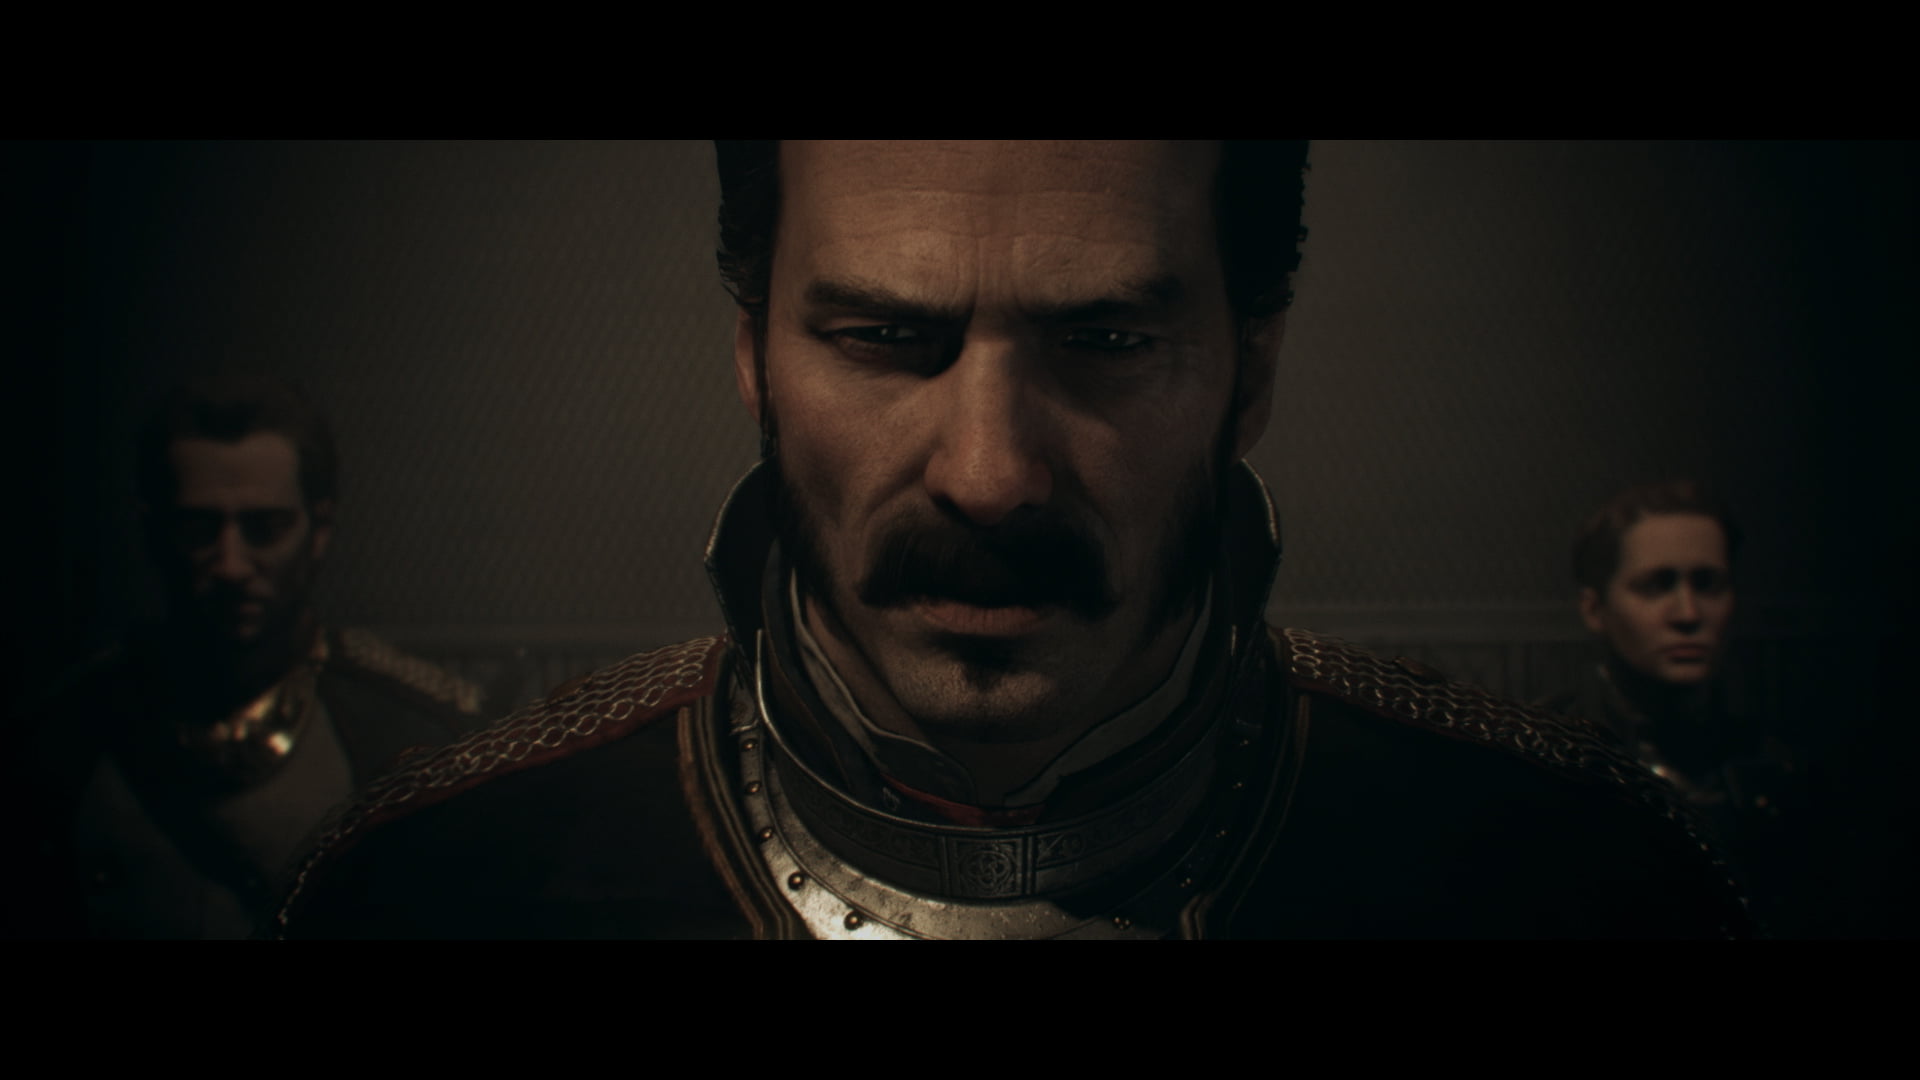 the order 1886 2